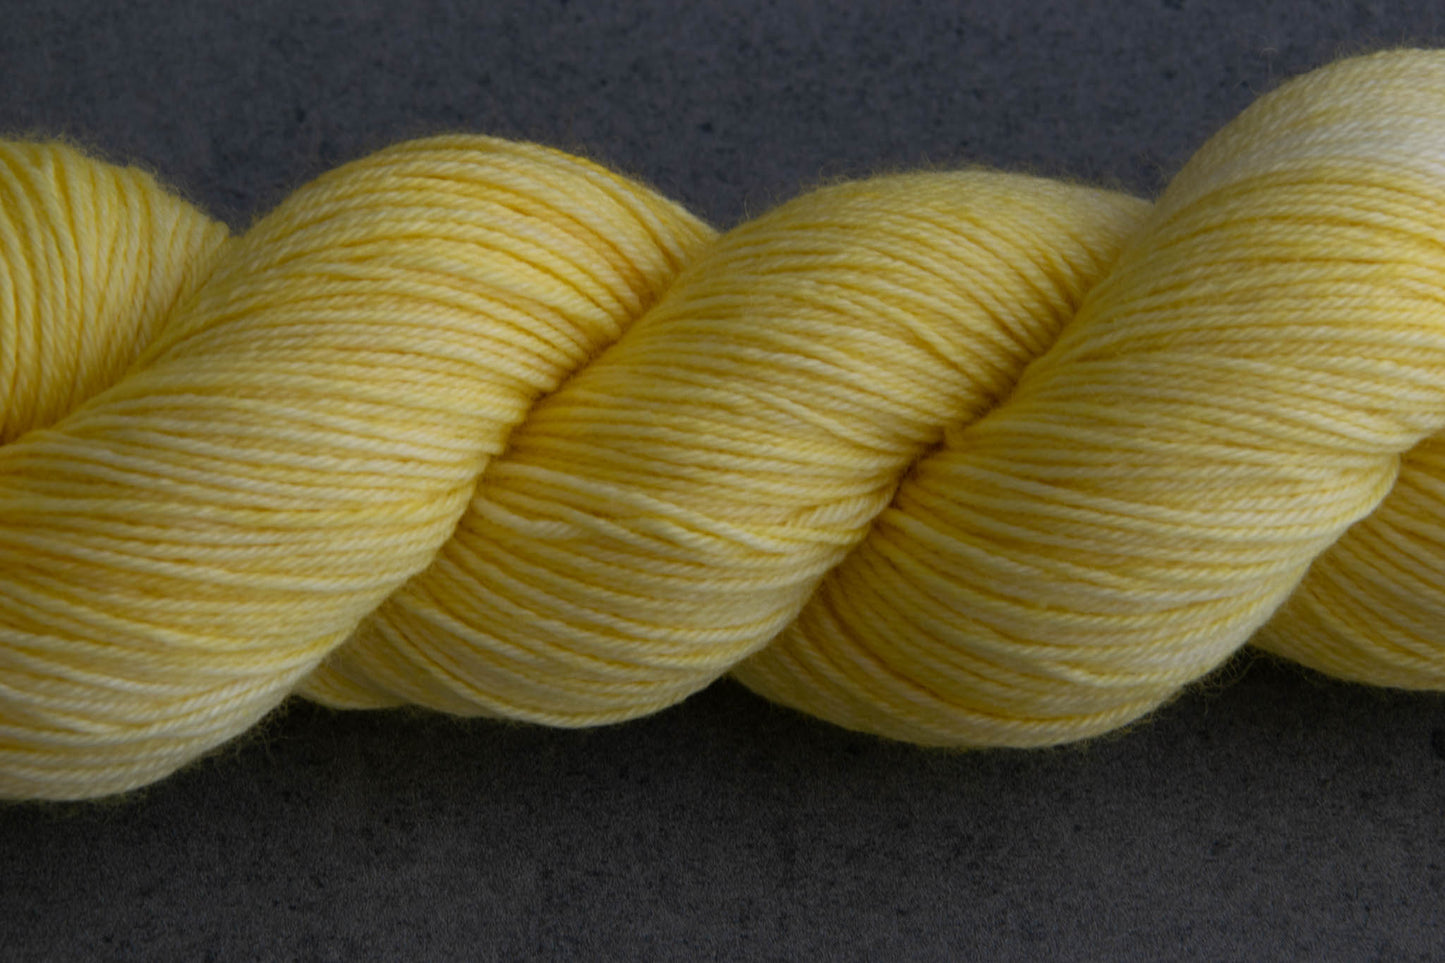 View of the tonal qualities of a skein of yellow hand-dyed yarn.